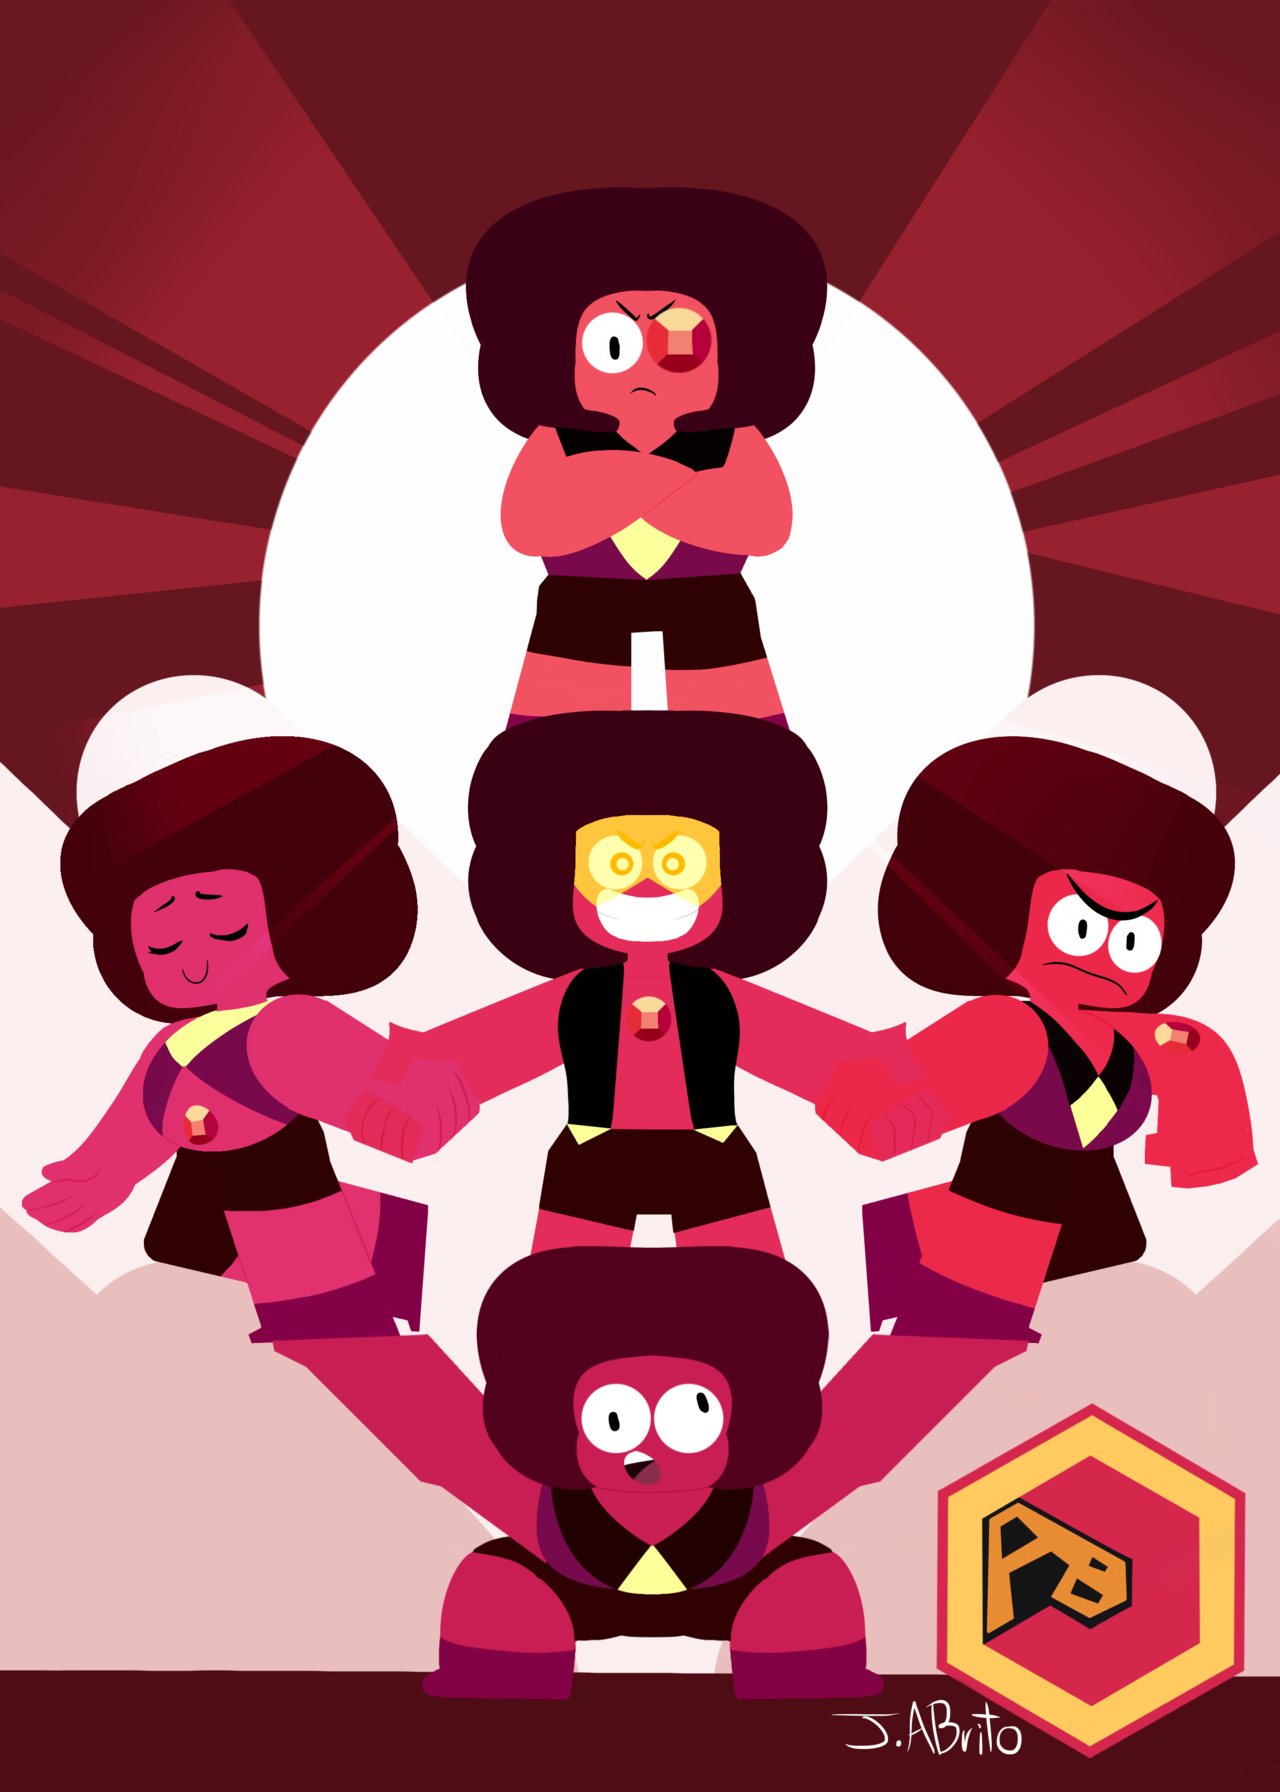 art-by-joseph-brito: The Ruby Squad! Aww! I love this style and the different personalities